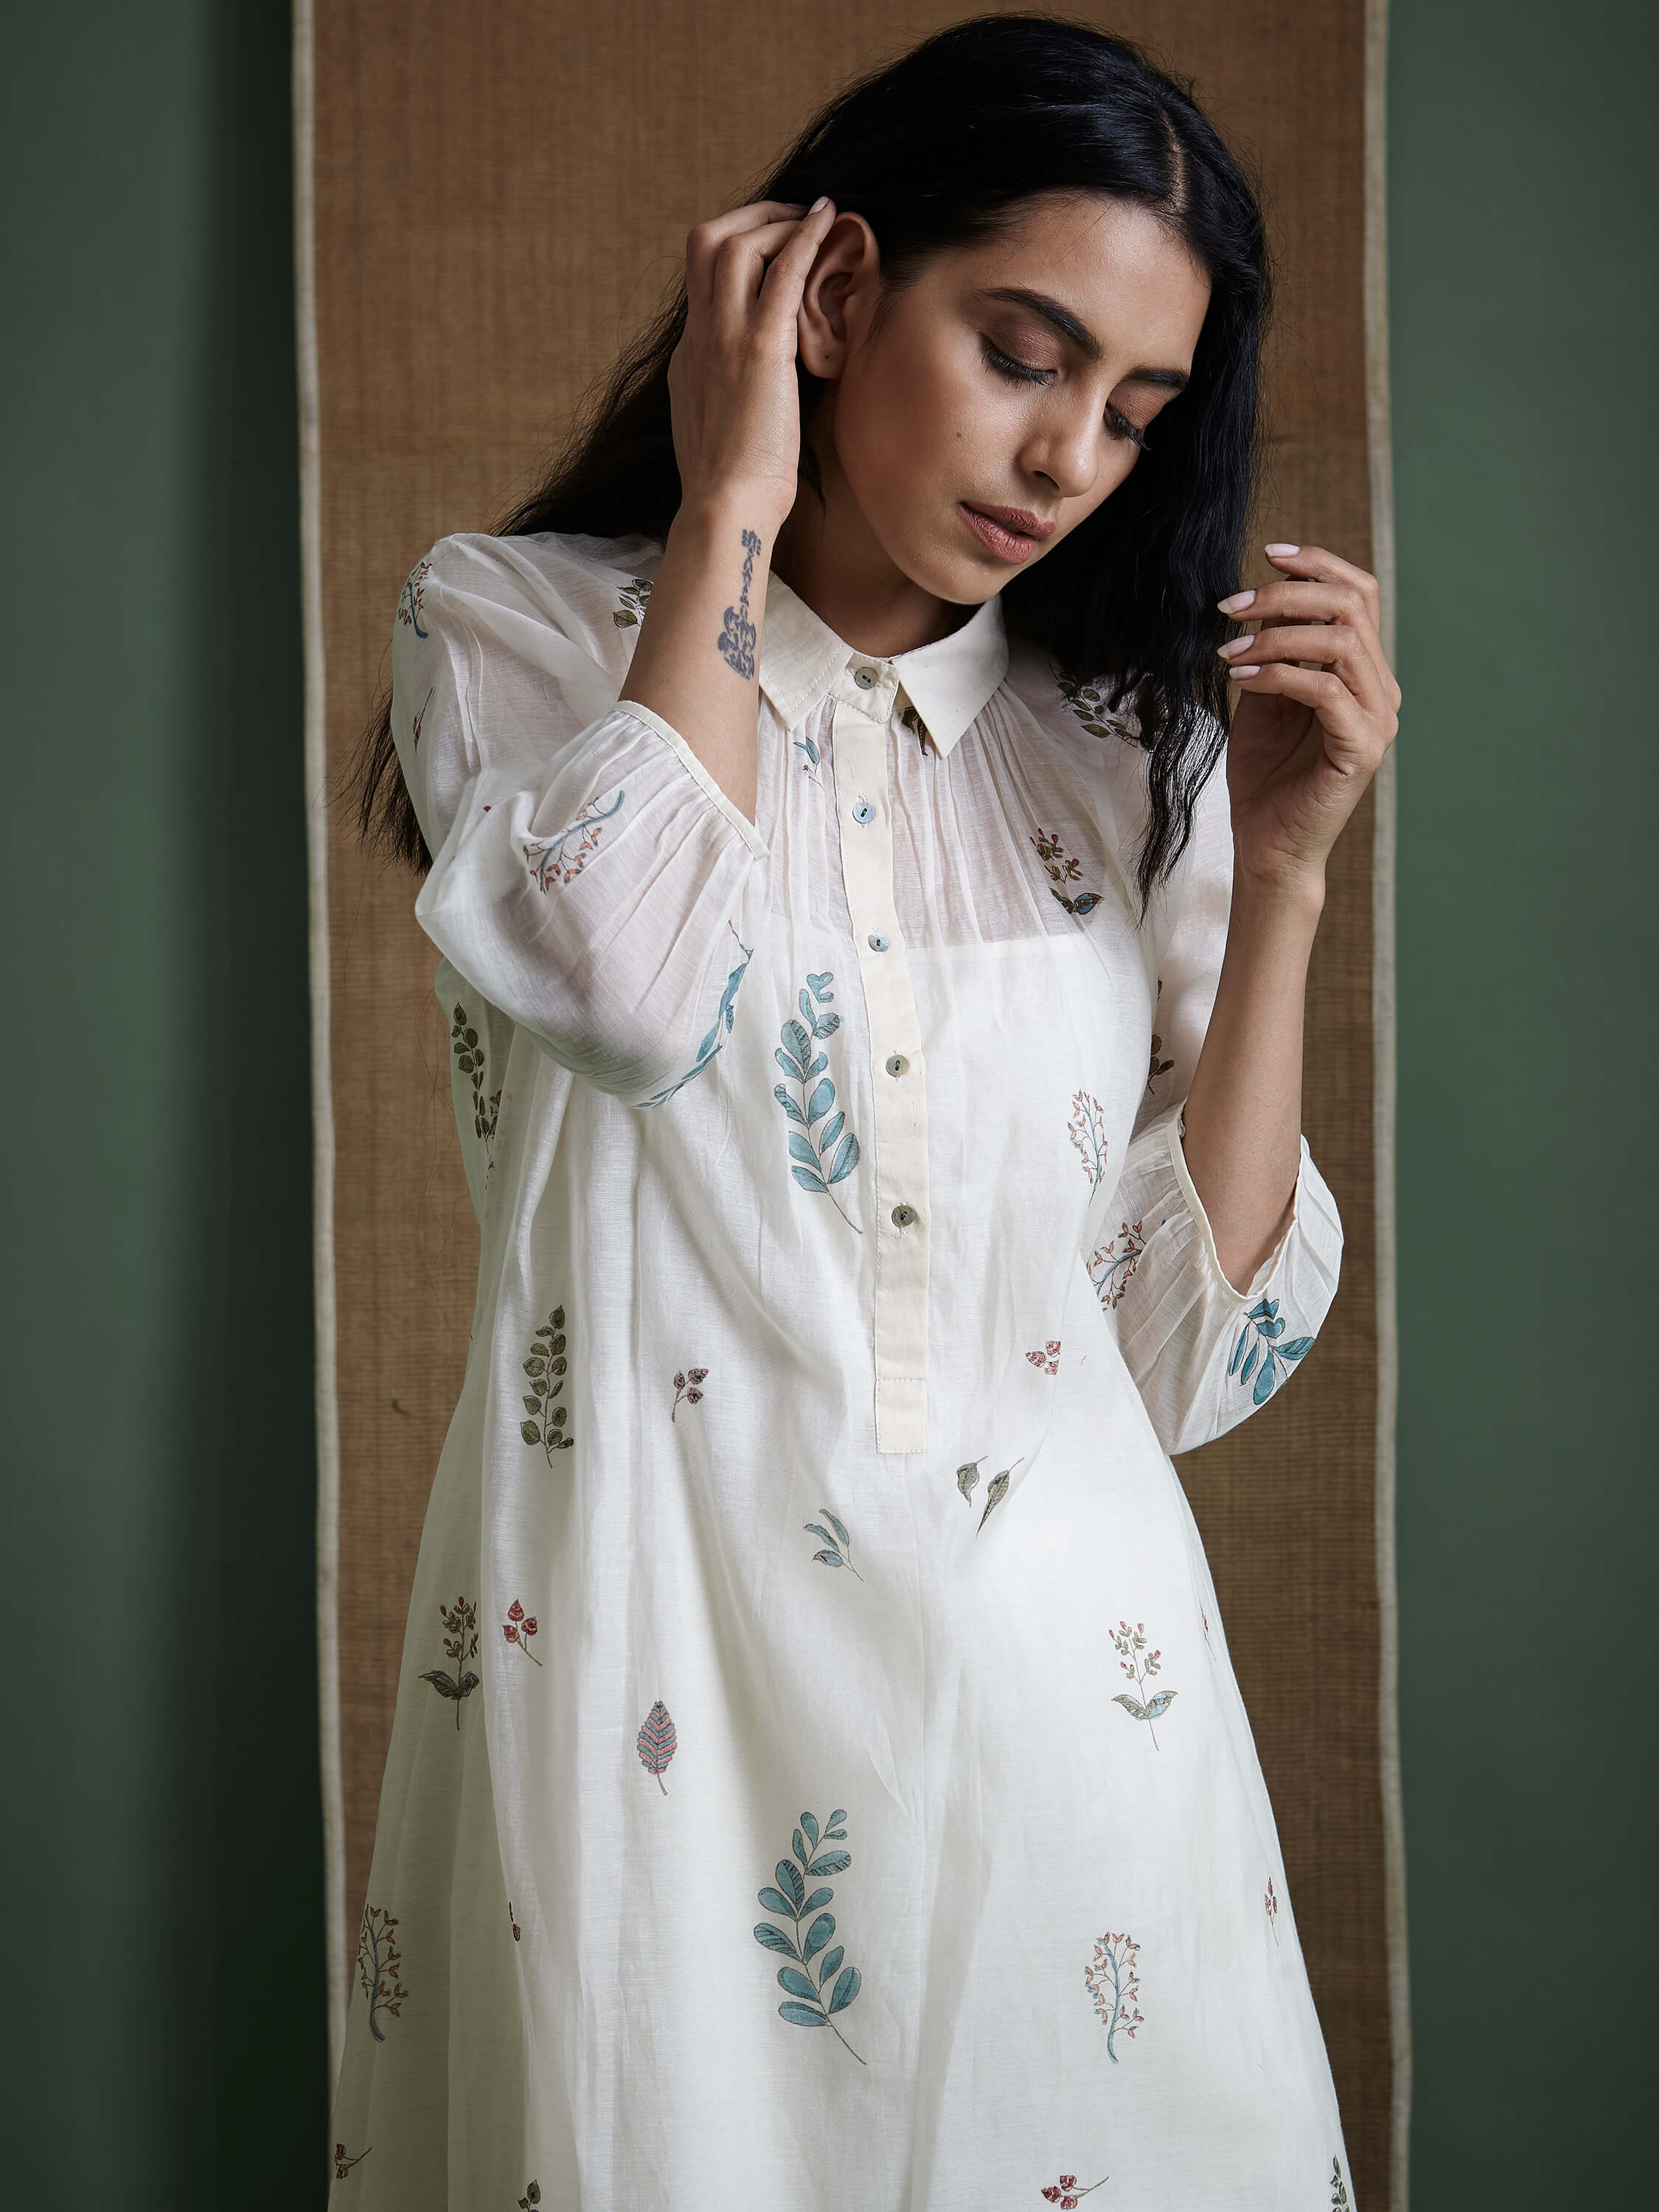 Woman wearing embroidered white dress posing against neutral background.